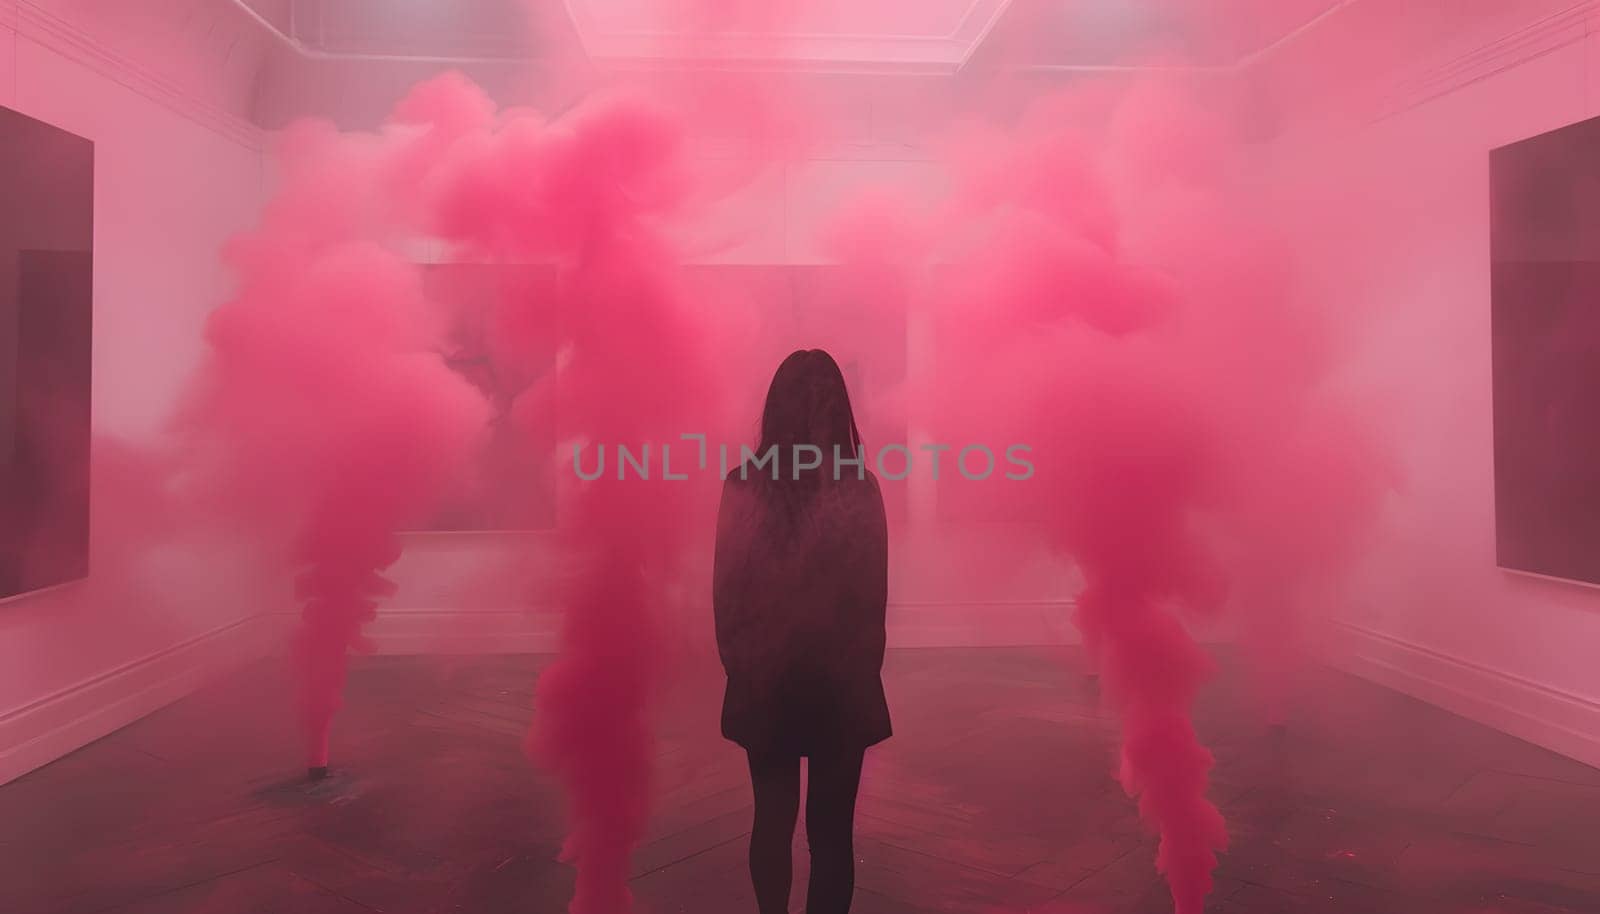 a woman is standing in a room filled with pink smoke by Nadtochiy